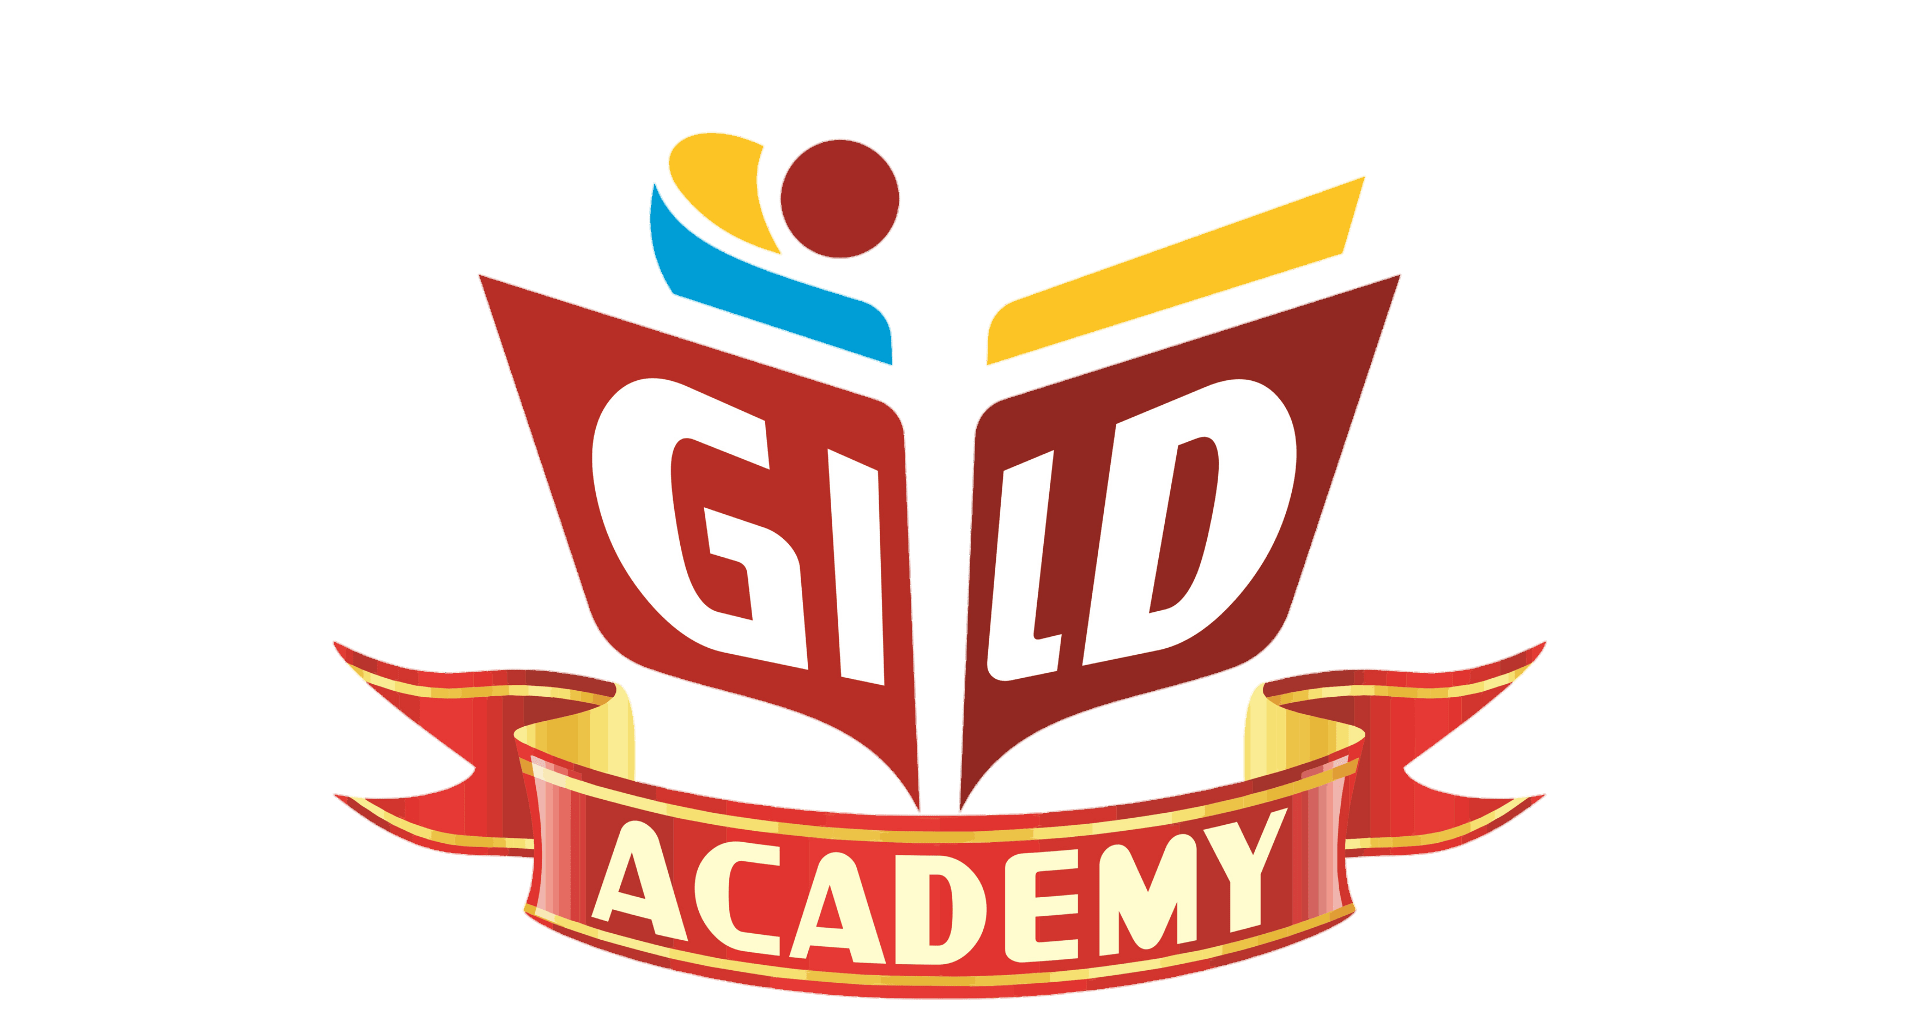 GILD ACADEMY|Colleges|Education